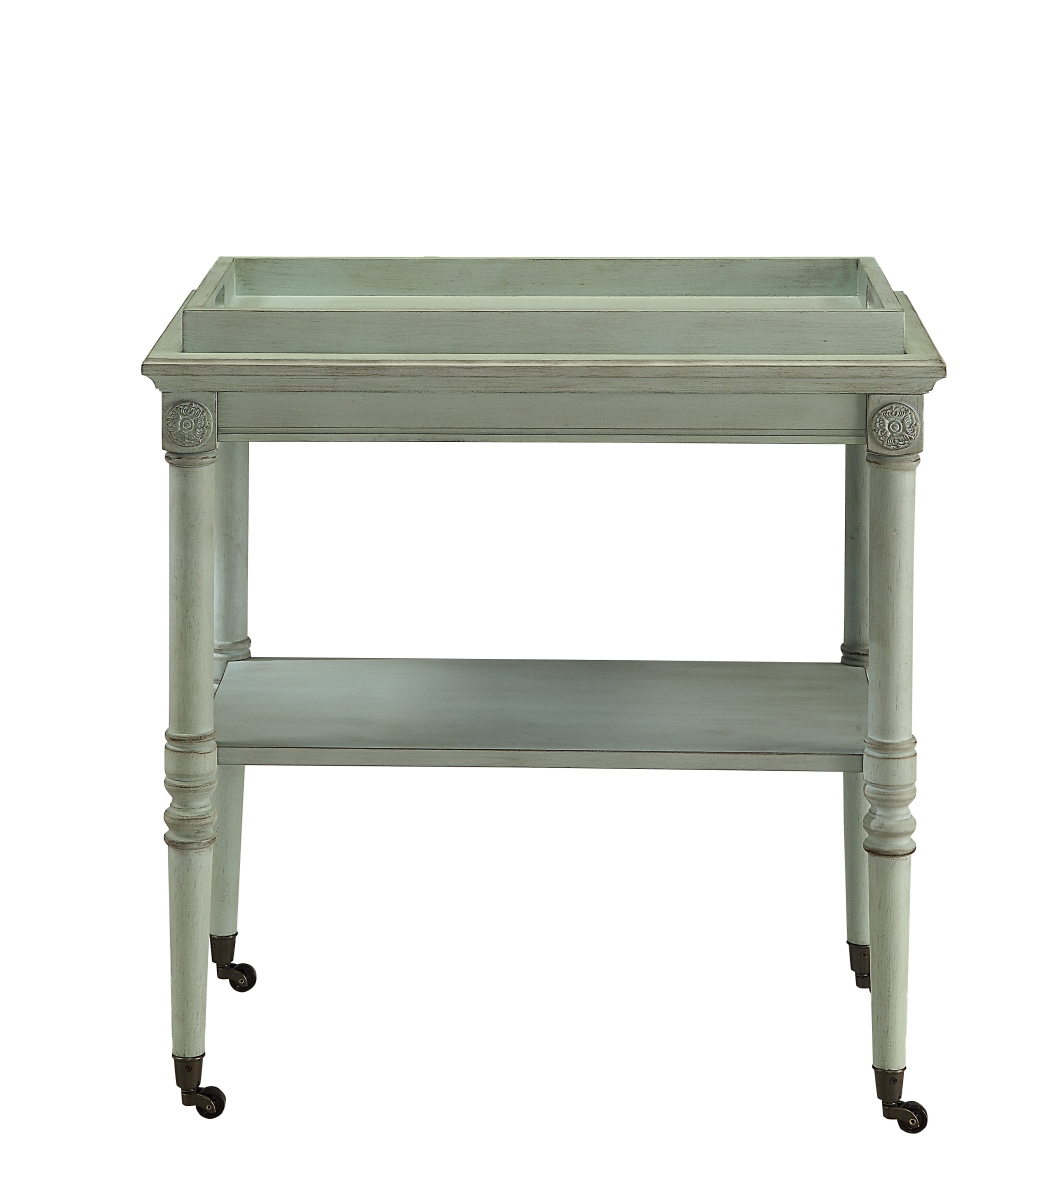 Picture of Home Roots Furniture 286342 32 x 30 x 18 in. MDF & Solid Wood Leg Tray Table - Antique Green